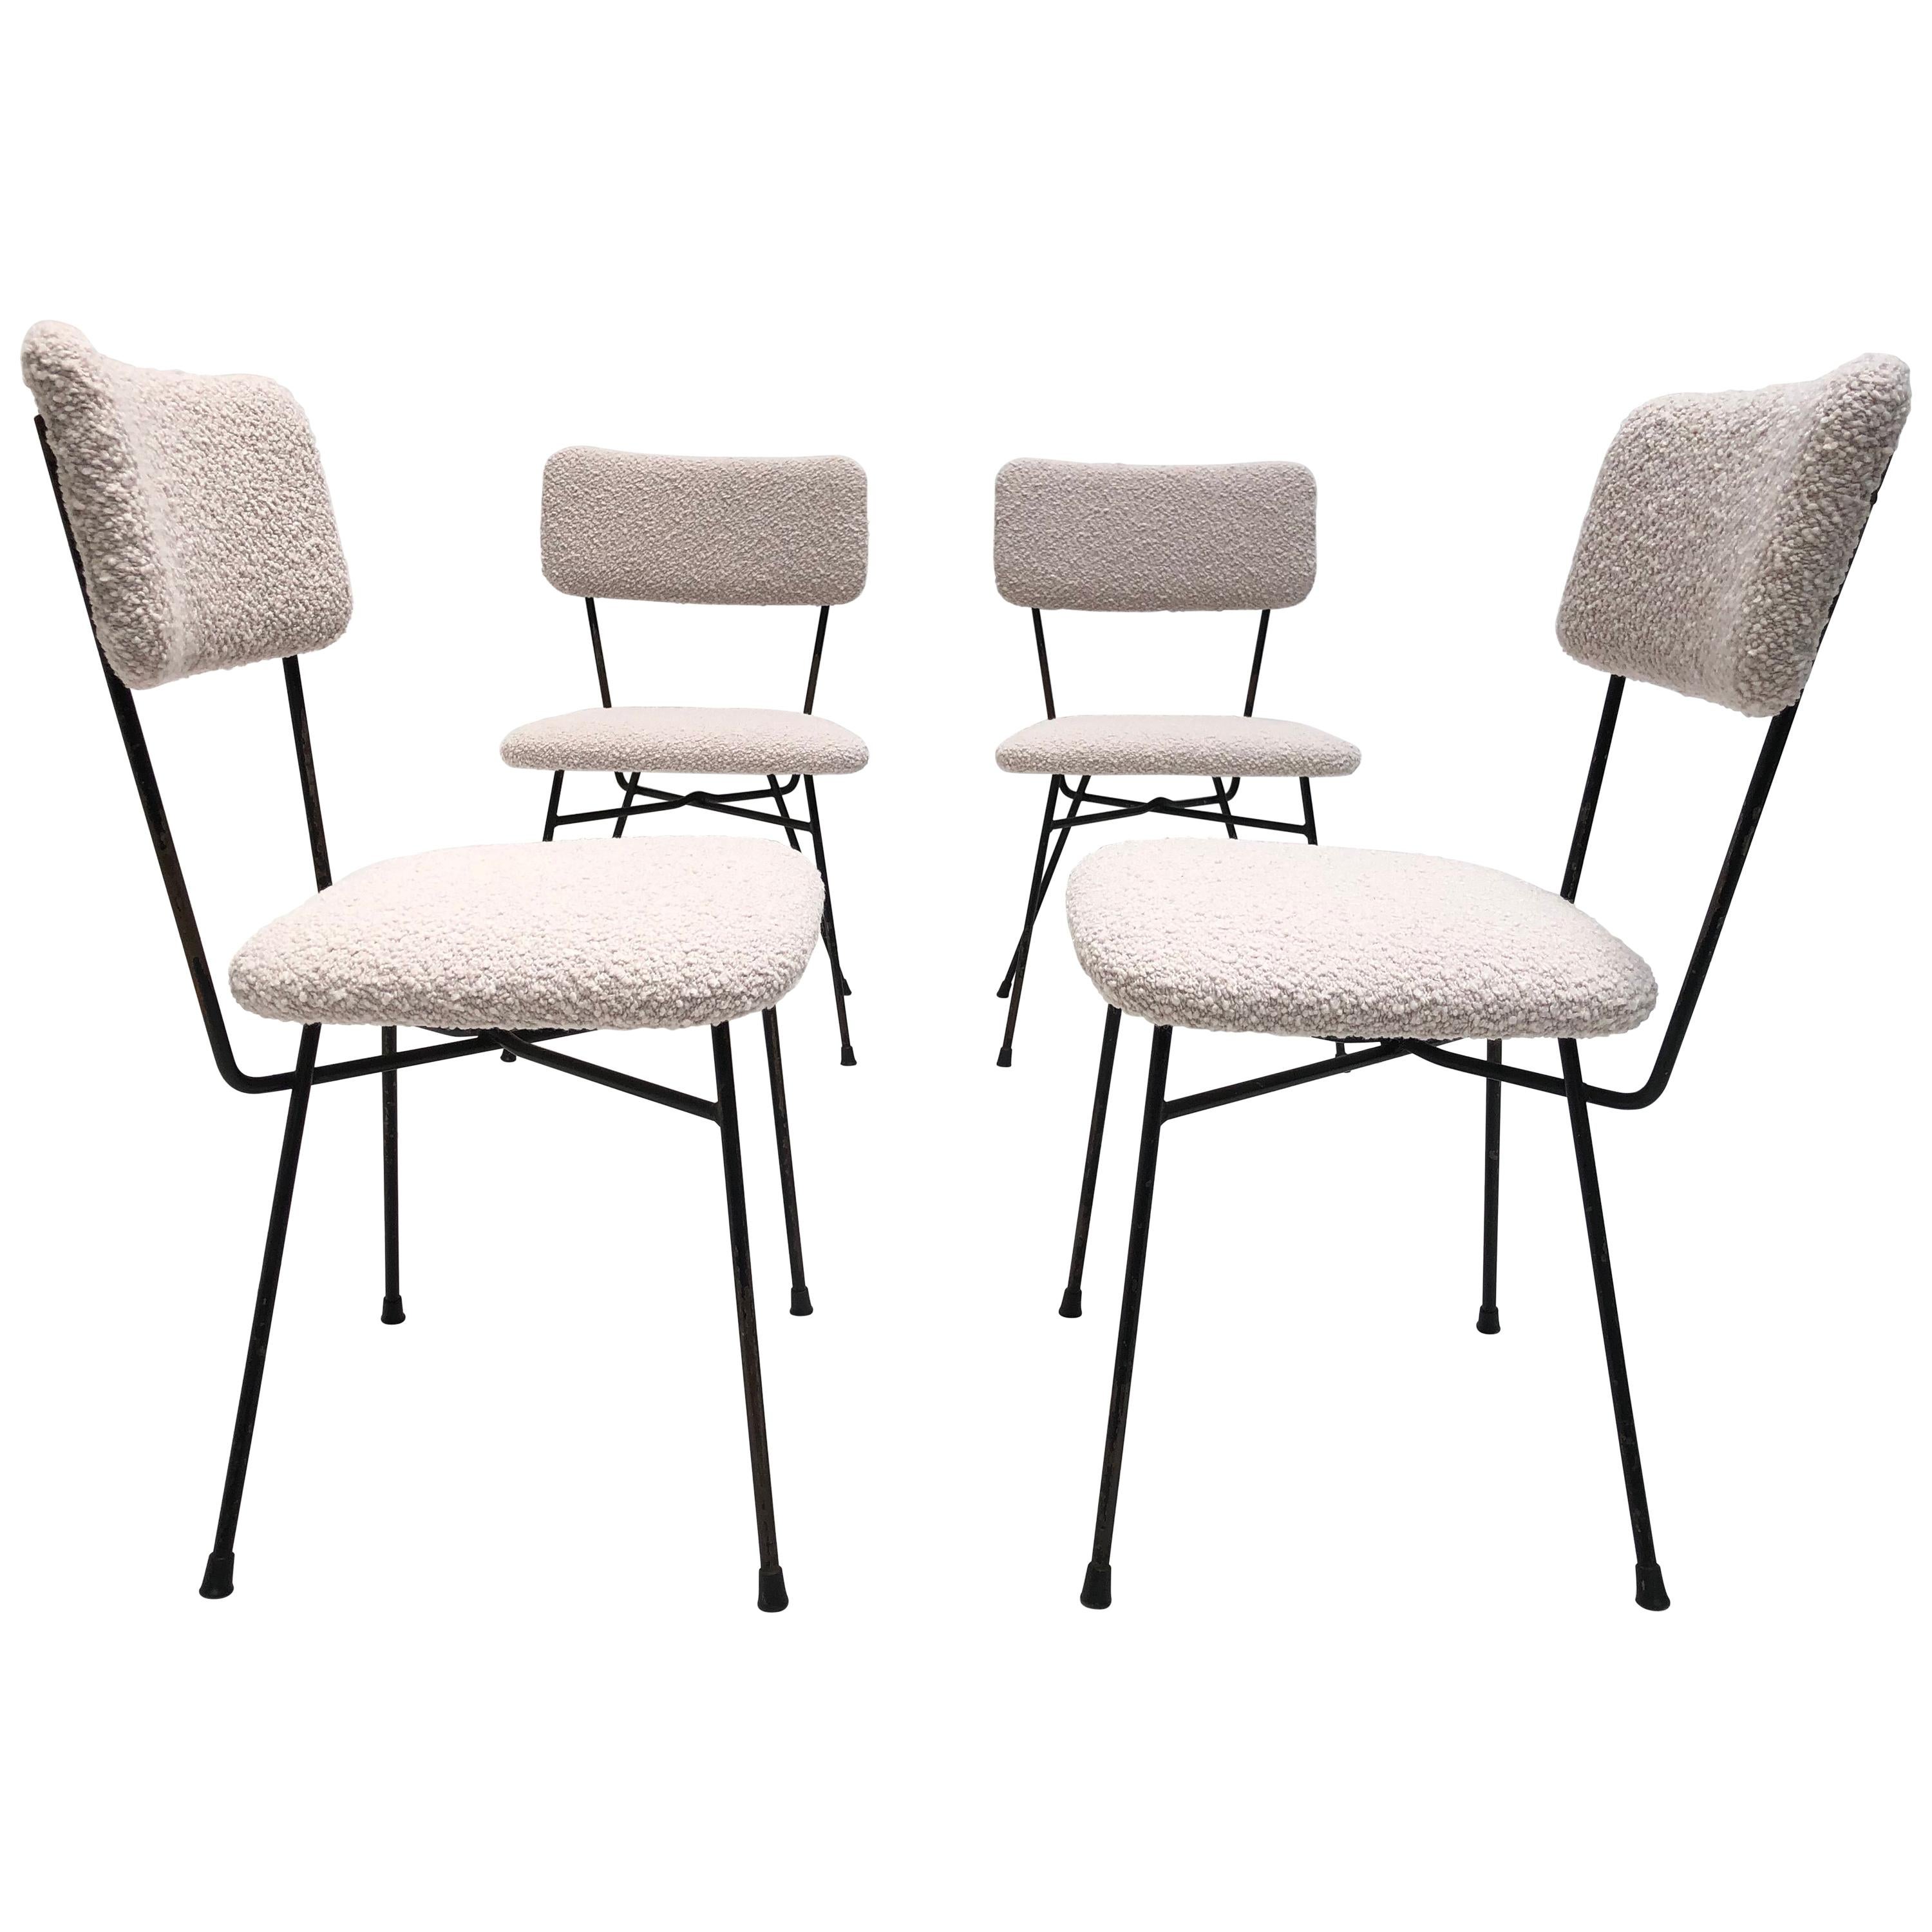 4 Dining Chairs by Pizzetti Rome Italy 1950s, New Wool Boucle Upholstery